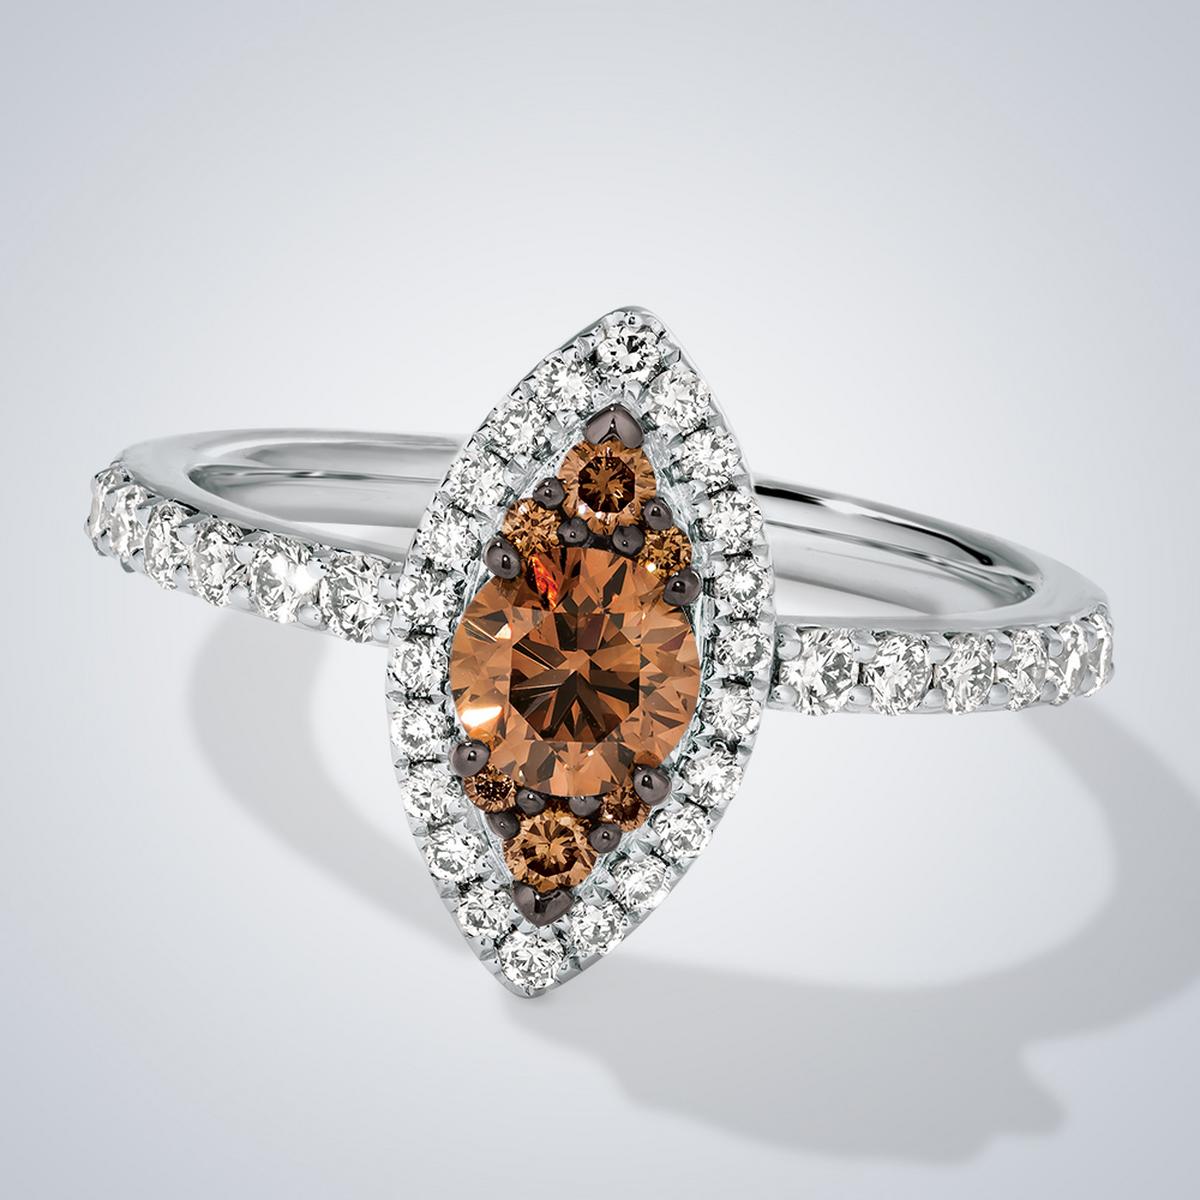 Pear shape Chocolate and Silver Le Vian ring